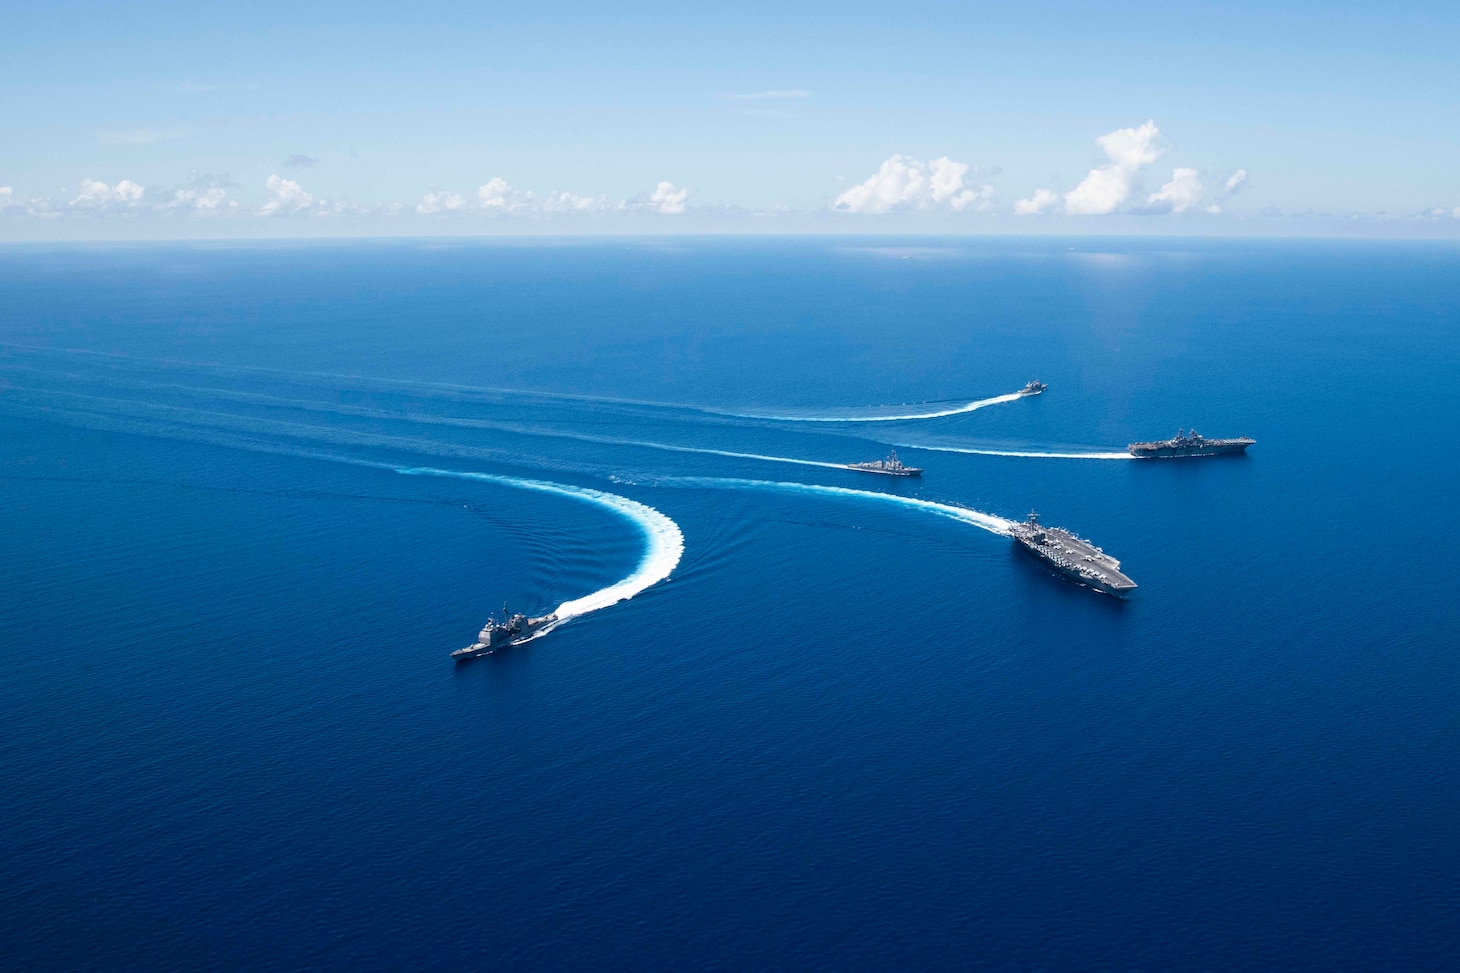 191006-N-VI515-0567 SOUTH CHINA SEA (October 6, 2019) Ships from Ronald Reagan Carrier Strike Group and Boxer Amphibious Ready Group conduct breakaway maneuvers while sailing in formation during security and stability operations in the U.S. 7th Fleet area of operations. U.S. 7th Fleet is the largest numbered fleet in the world, and the U.S. Navy has operated in the Indo-Pacific region for more than 70 years, providing credible, ready forces to help preserve peace and prevent conflict.